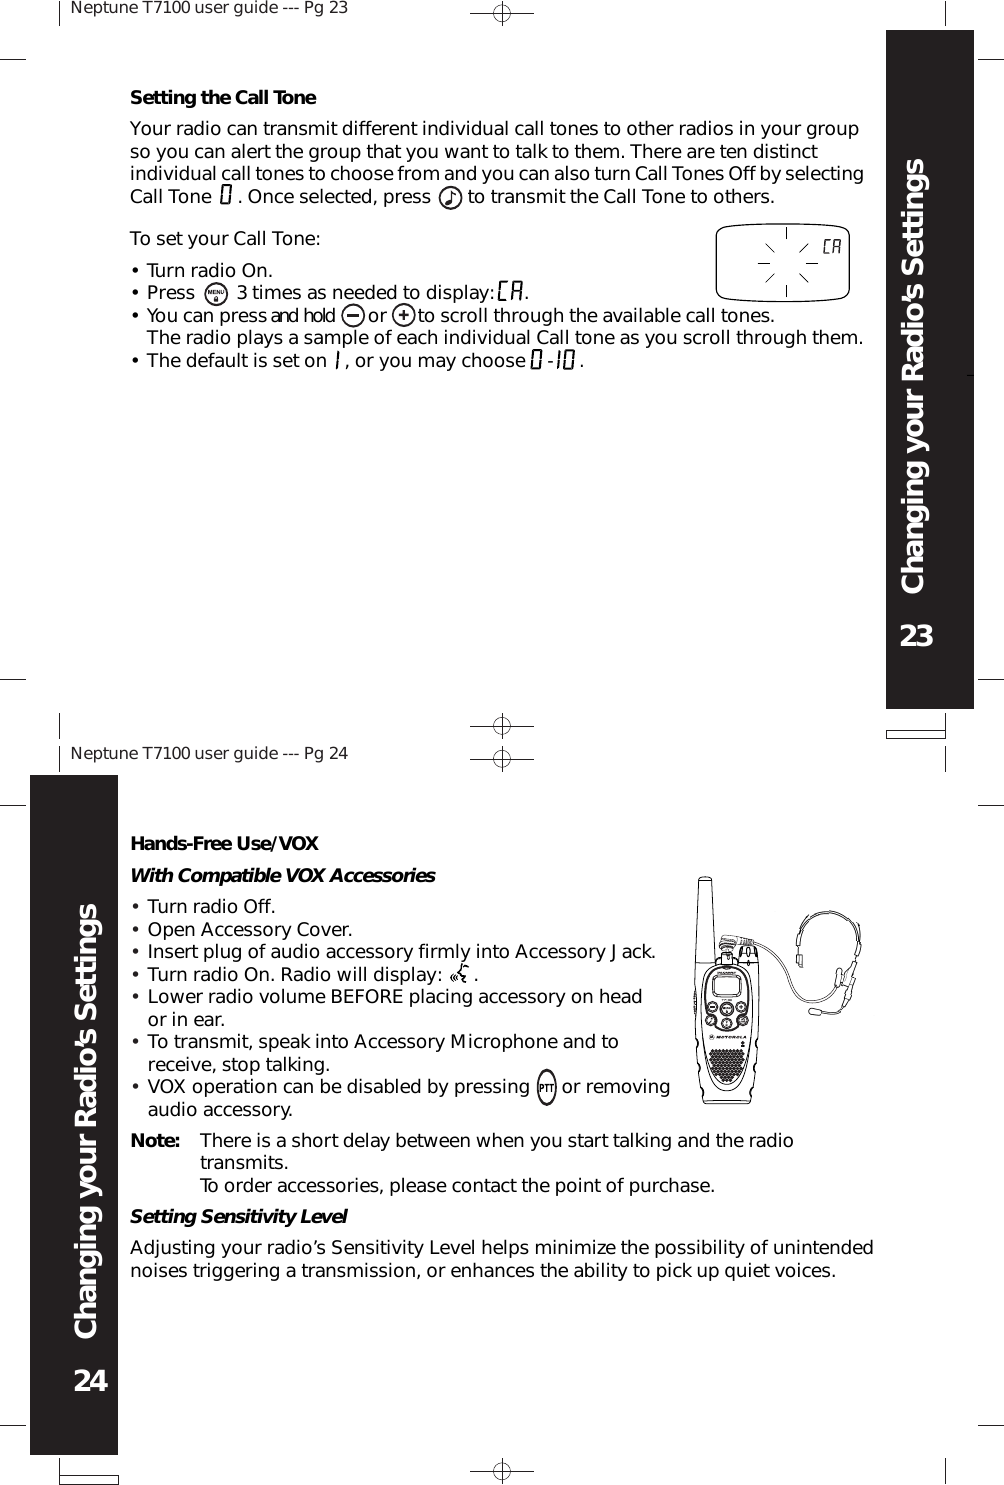 Neptune T7100 user guide --- Pg 2323Changing your Radio’s SettingsNeptune T7100 user guide --- Pg 2424Changing your Radio’s SettingsSetting the Call ToneYour radio can transmit different individual call tones to other radios in your groupso you can alert the group that you want to talk to them. There are ten distinctindividual call tones to choose from and you can also turn Call Tones Off by selectingCall Tone     . Once selected, press       to transmit the Call Tone to others.Tu rn radio  On.Press          3 times as needed to display:         .You can press and  hold         or         to scroll through the available call tones.The radio plays a sample of each individual Call tone as you scroll through them.The default is set on     , or you may choose      -         .To set your Call Tone:••••Hands-Free Use/VOXWith Compatible VOX AccessoriesTurn radio Off.Open Accessory Cover.Insert plug of audio accessory firmly into Accessory Jack.Turn radio On. Radio will display:      .Lower radio volume BEFORE placing accessory on heador in ear.To transmit, speak into Accessory Microphone and toreceive, stop talking.VOX operation can be disabled by pressing      or removingaudio accessory.•••••••Note: There is a short delay between when you start talking and the radiotransmits.To order accessories, please contact the point of purchase.Setting Sensitivity LevelAdjusting your radio’s Sensitivity Level helps minimize the possibility of unintendednoises triggering a transmission, or enhances the ability to pick up quiet voices.